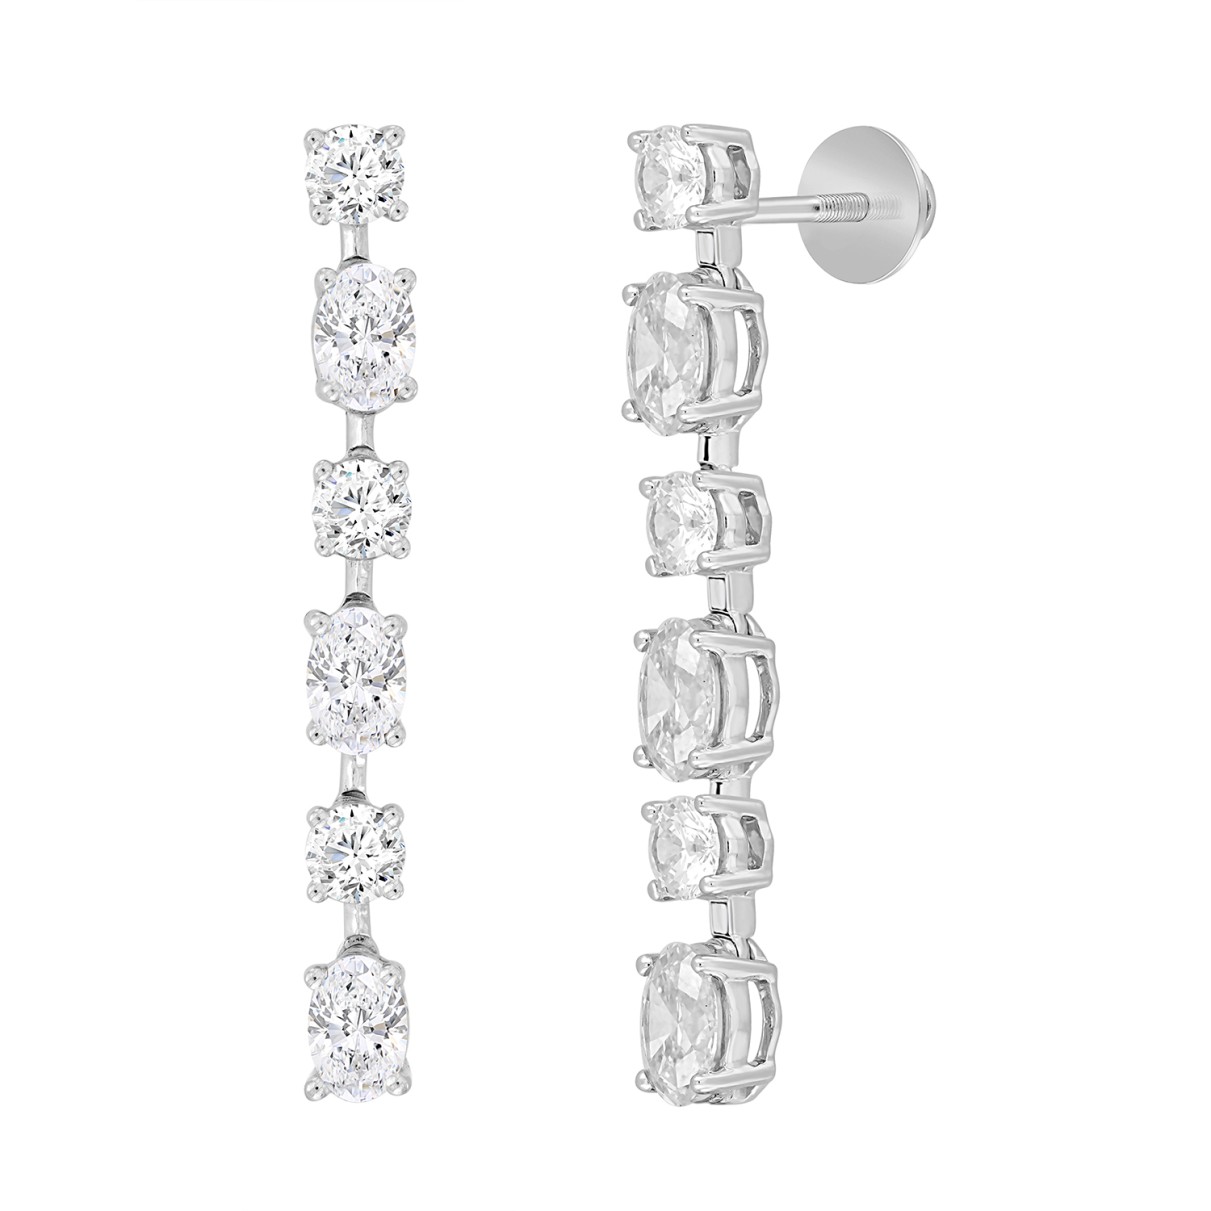 LINEAR EARRINGS 4 1/2CT OVAL/ROUND DIAMOND 14K WHITE GOLD